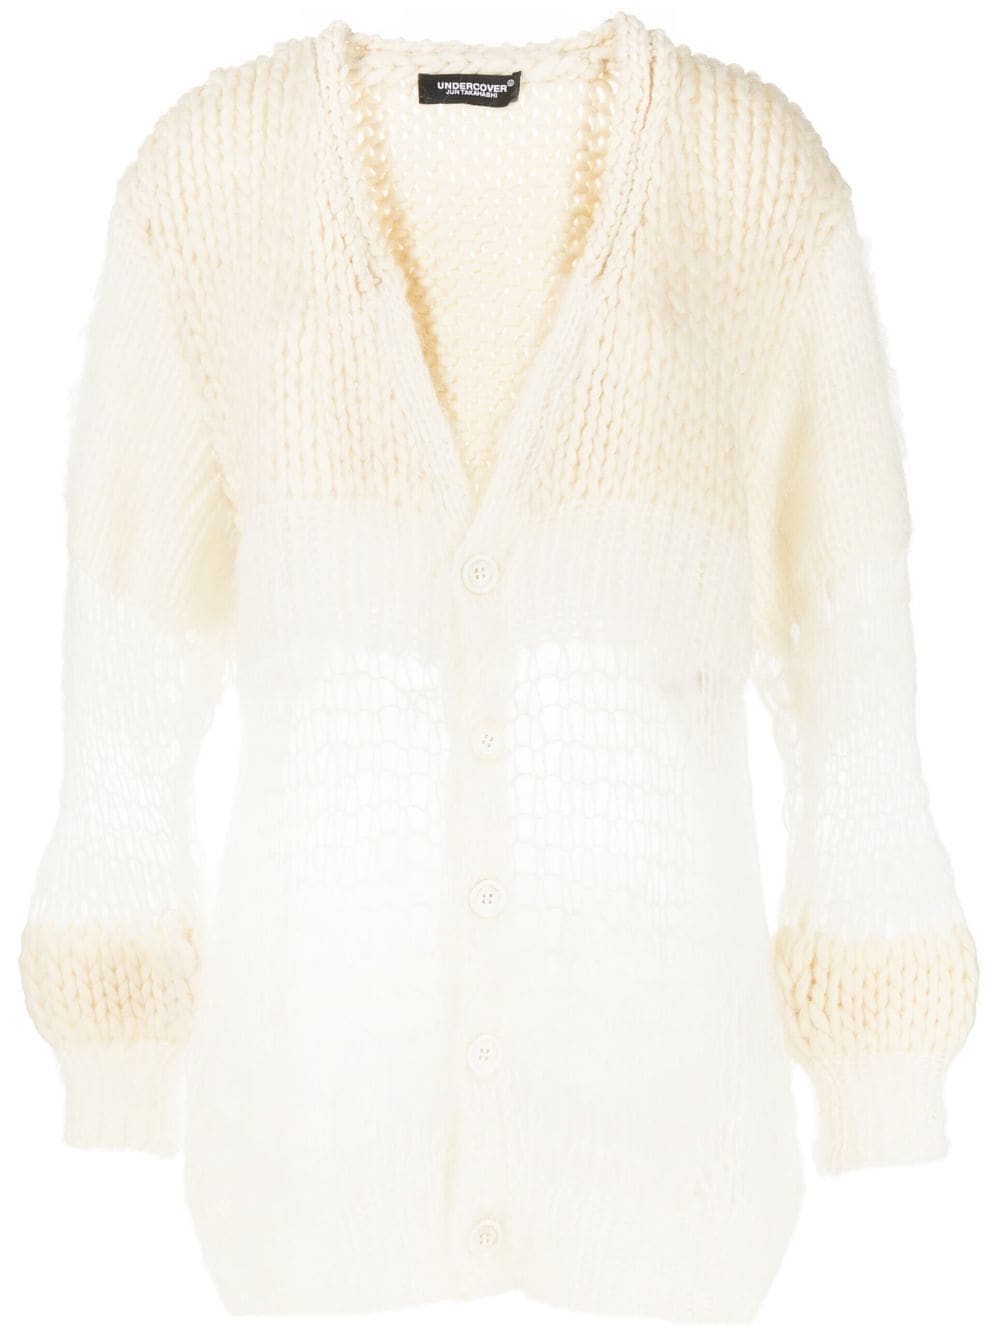 Undercover contrasting chunky knit cardigan - White von Undercover